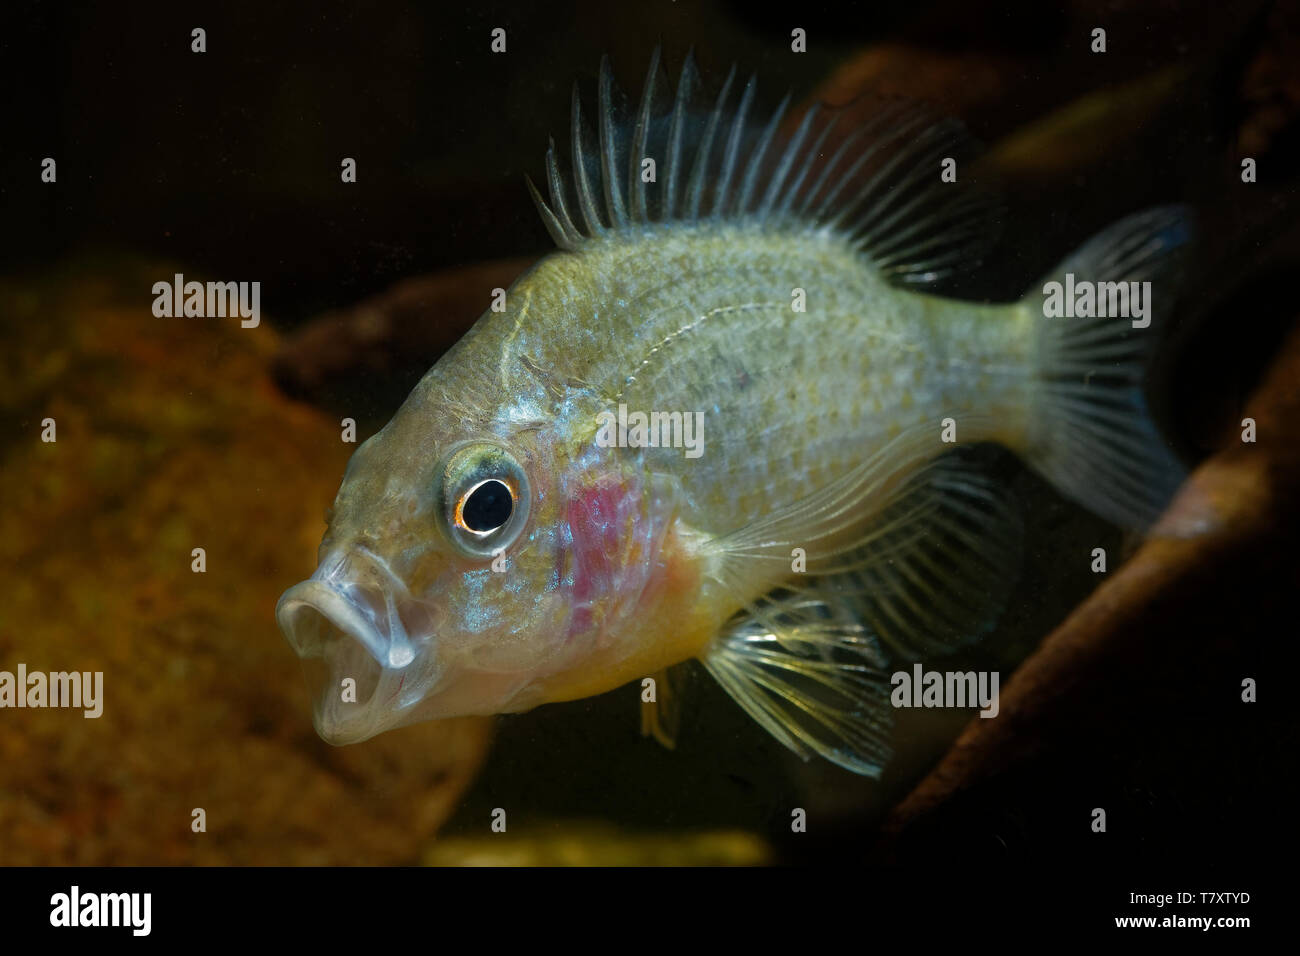 The pumpkinseed = Common Sunfish (Lepomis gibbosus) is a North American freshwater fish of the sunfish family (Centrarchidae). It is also referred to  Stock Photo